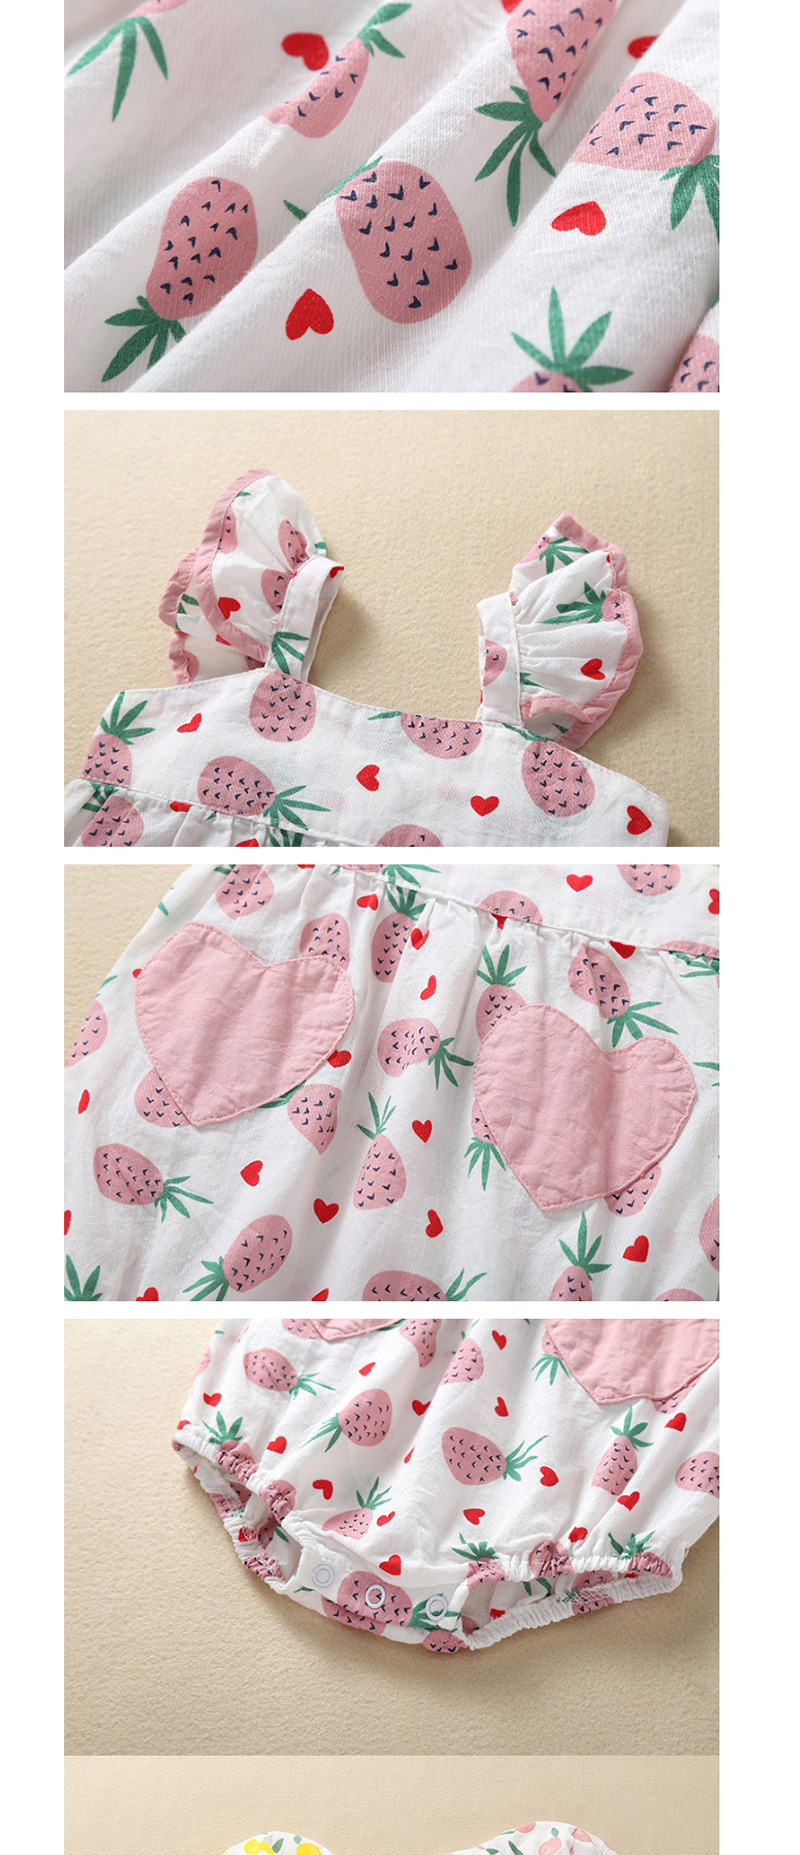 Fashion Pink Apple Fruit Print Love Patch Pocket Baby Triangle Lace,Kids Clothing